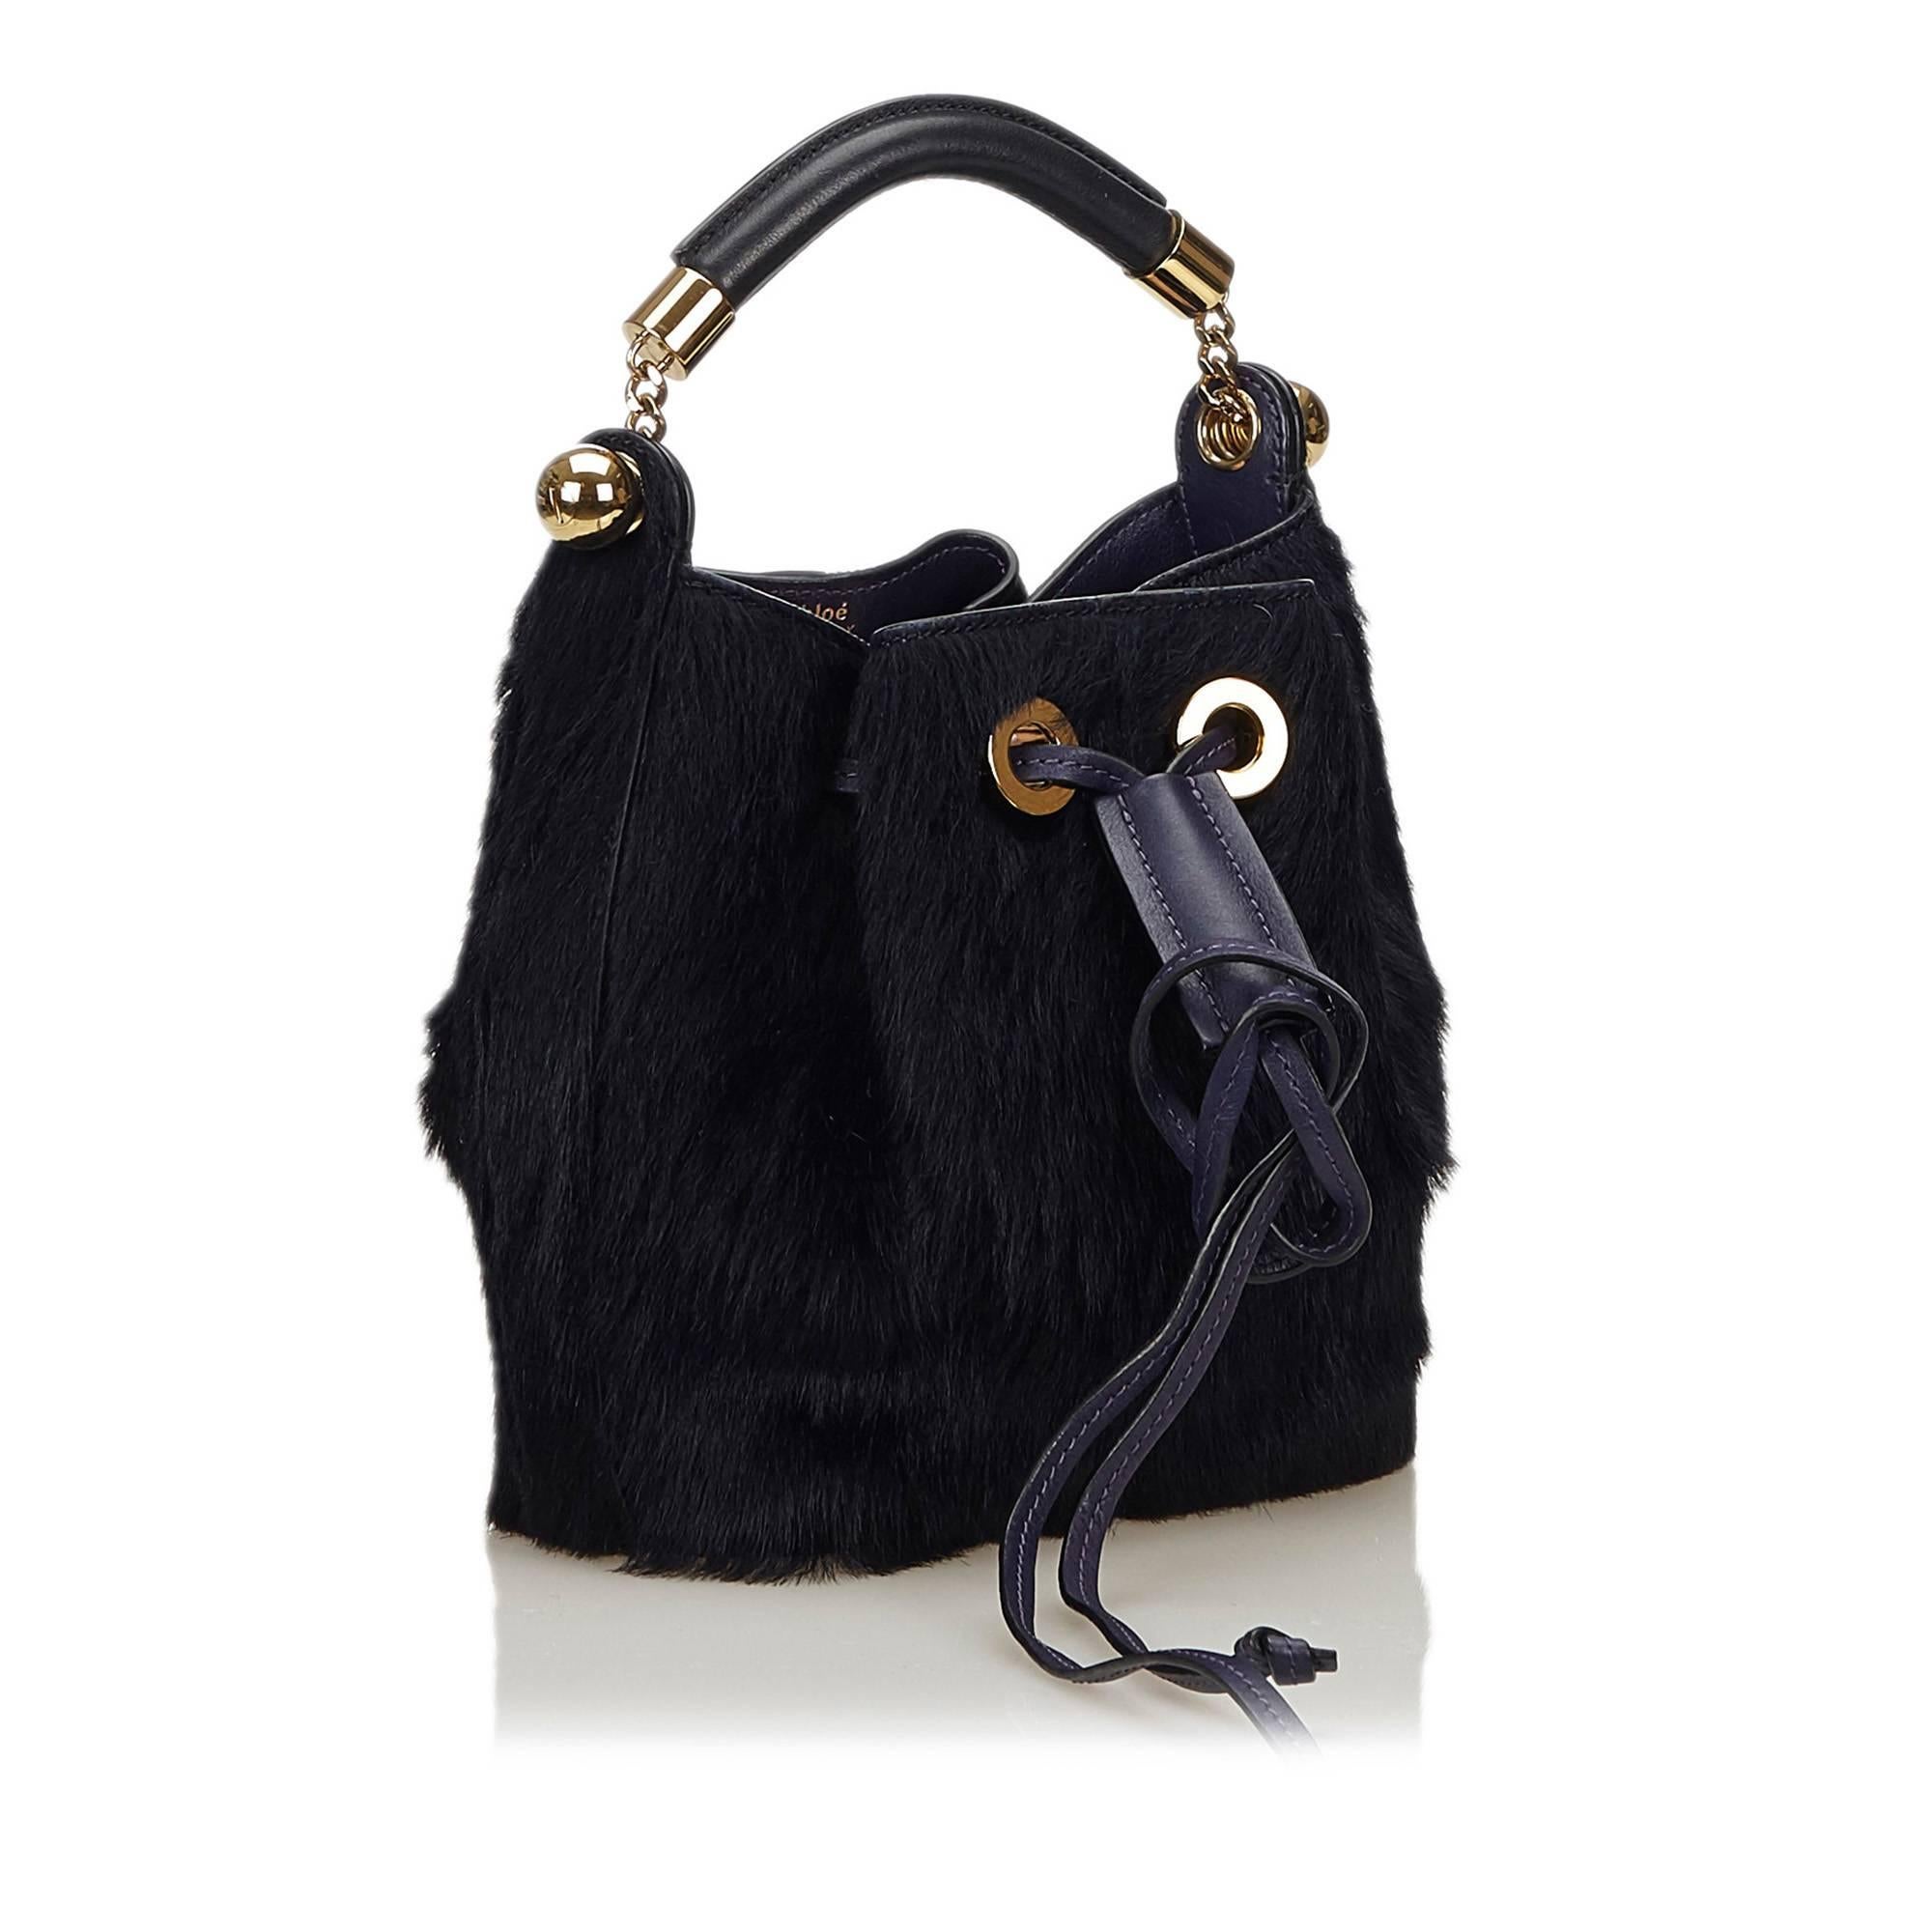 The Gala Bag features fur body, rolled leather handle, and a top drawstring closure. 

It carries an A condition rating.

Dimensions: 
Length 18 cm
Width 18 cm
Depth 8 cm
Hand Drop 8 cm

Inclusions: Shoulder Strap

Color: Blue x Dark Blue

Material: